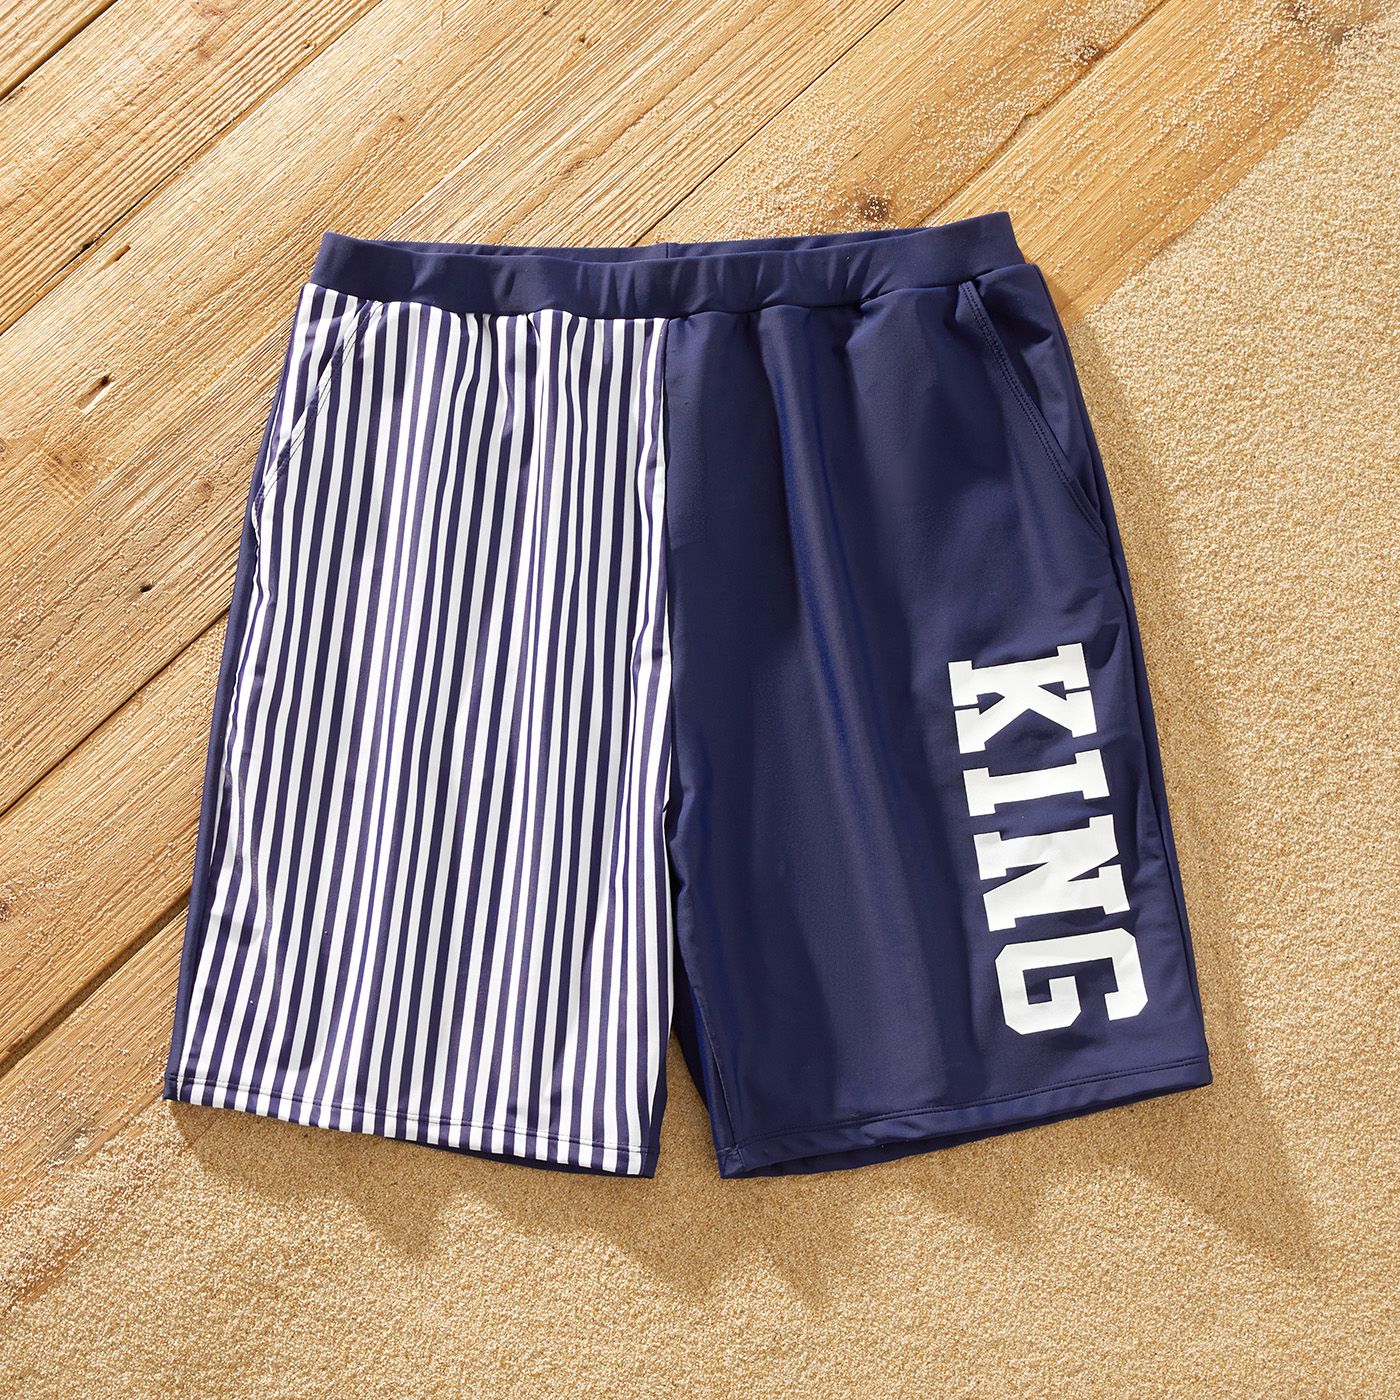 Family Matching Letter Print Splicing Striped Swim Trunks Shorts And Ruffle One-Piece Swimsuit